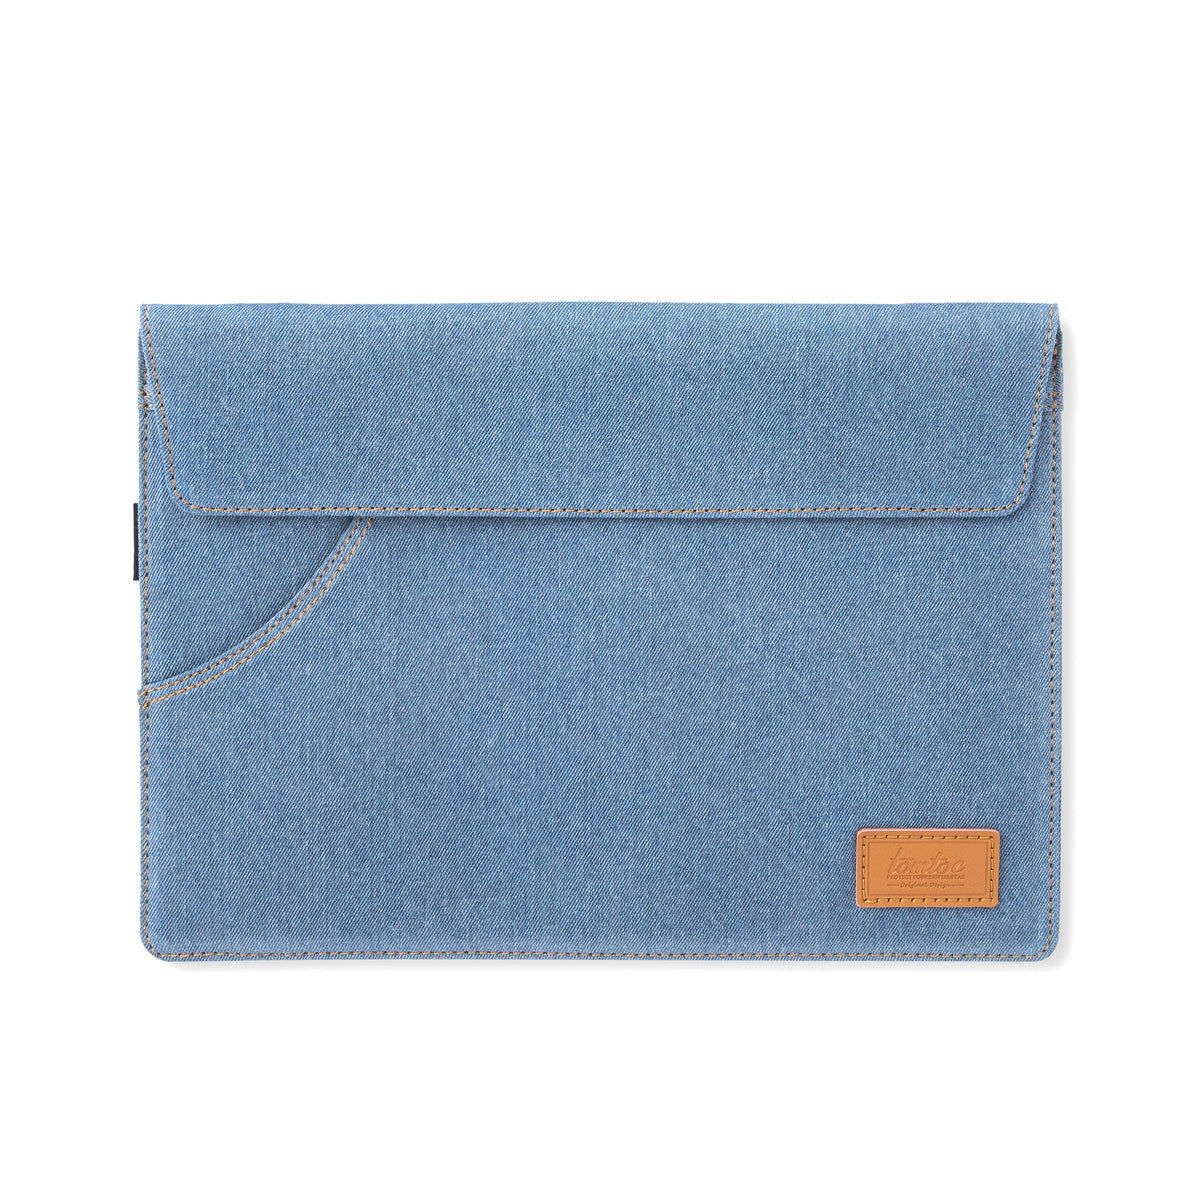 tomtoc 13 Inch Casual Jeans Laptop Sleeve with Shoulder Strap - Blue Jeans